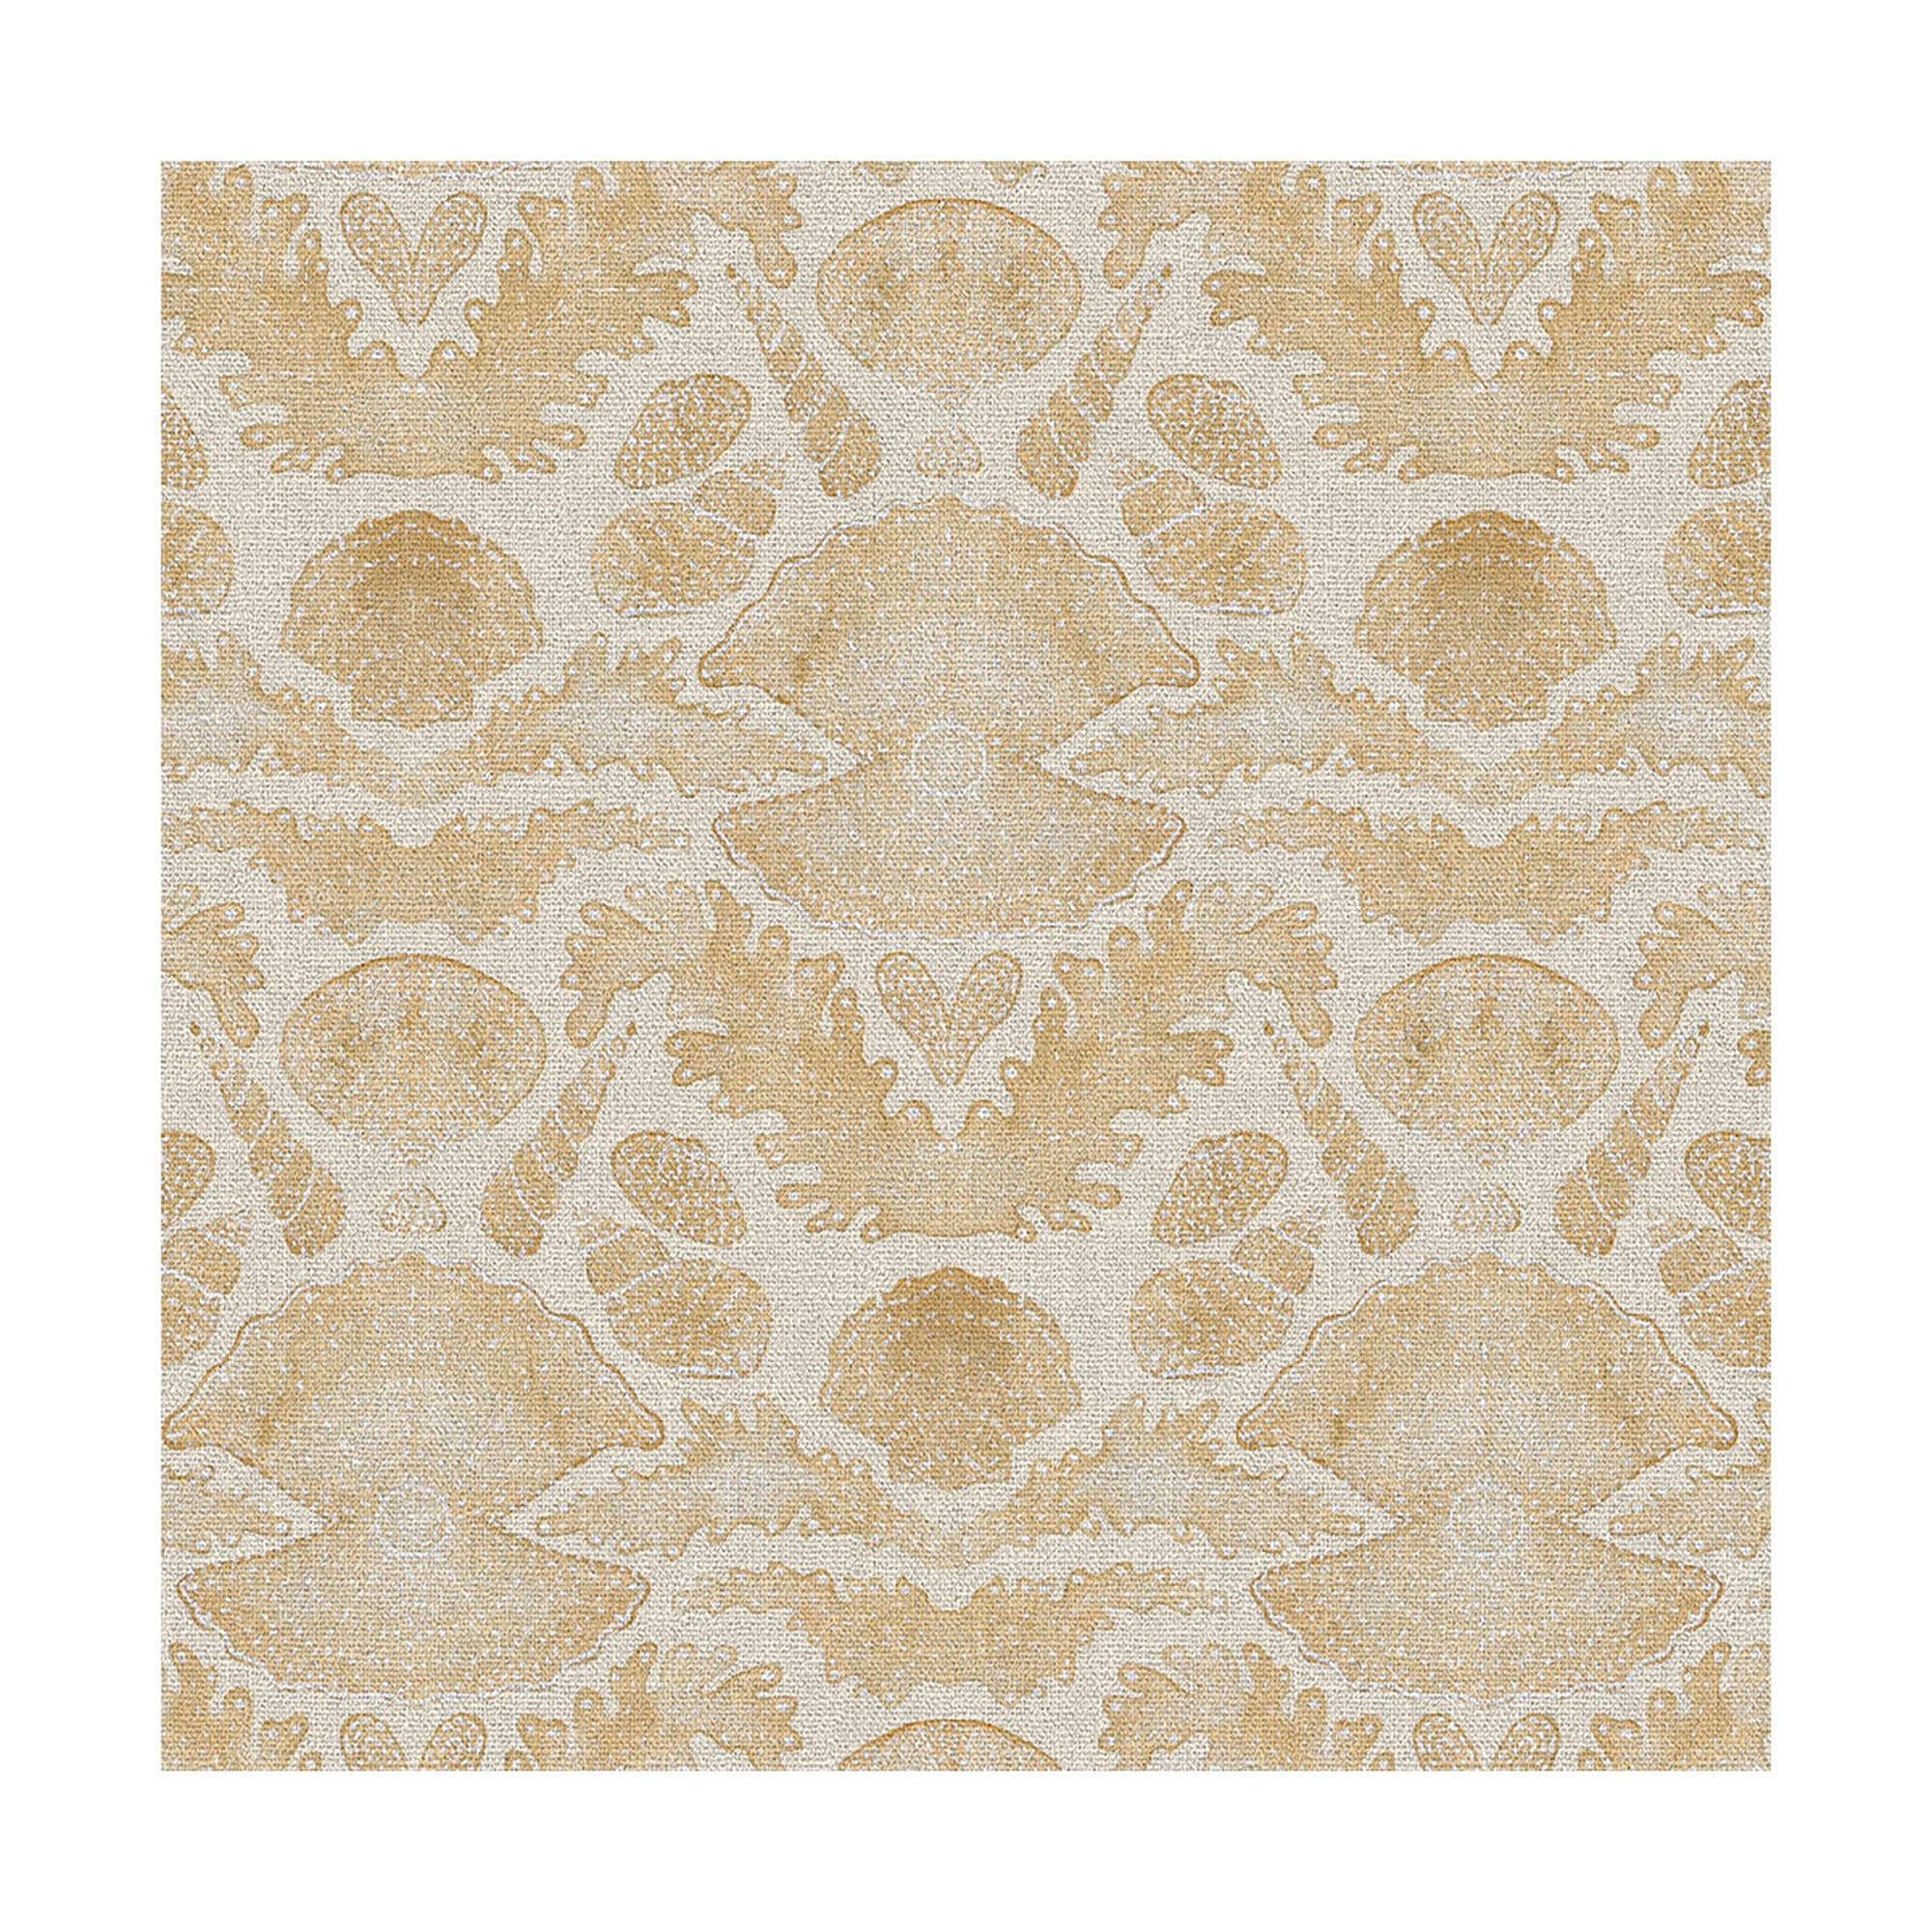 Shell Grotto Fabric | Sand